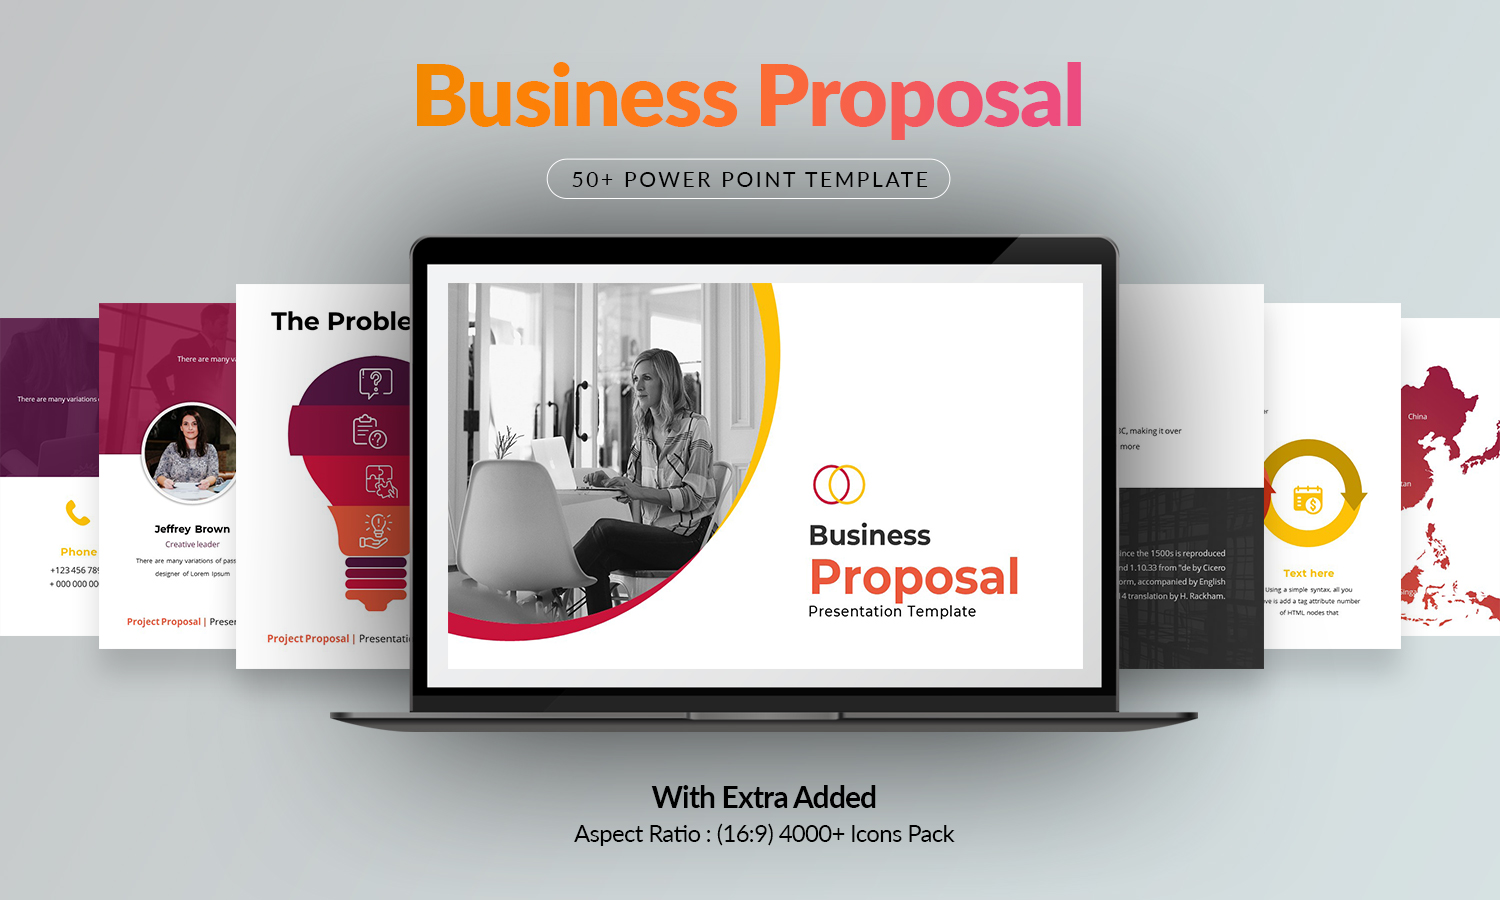 Business Proposal - PowerPoint Template